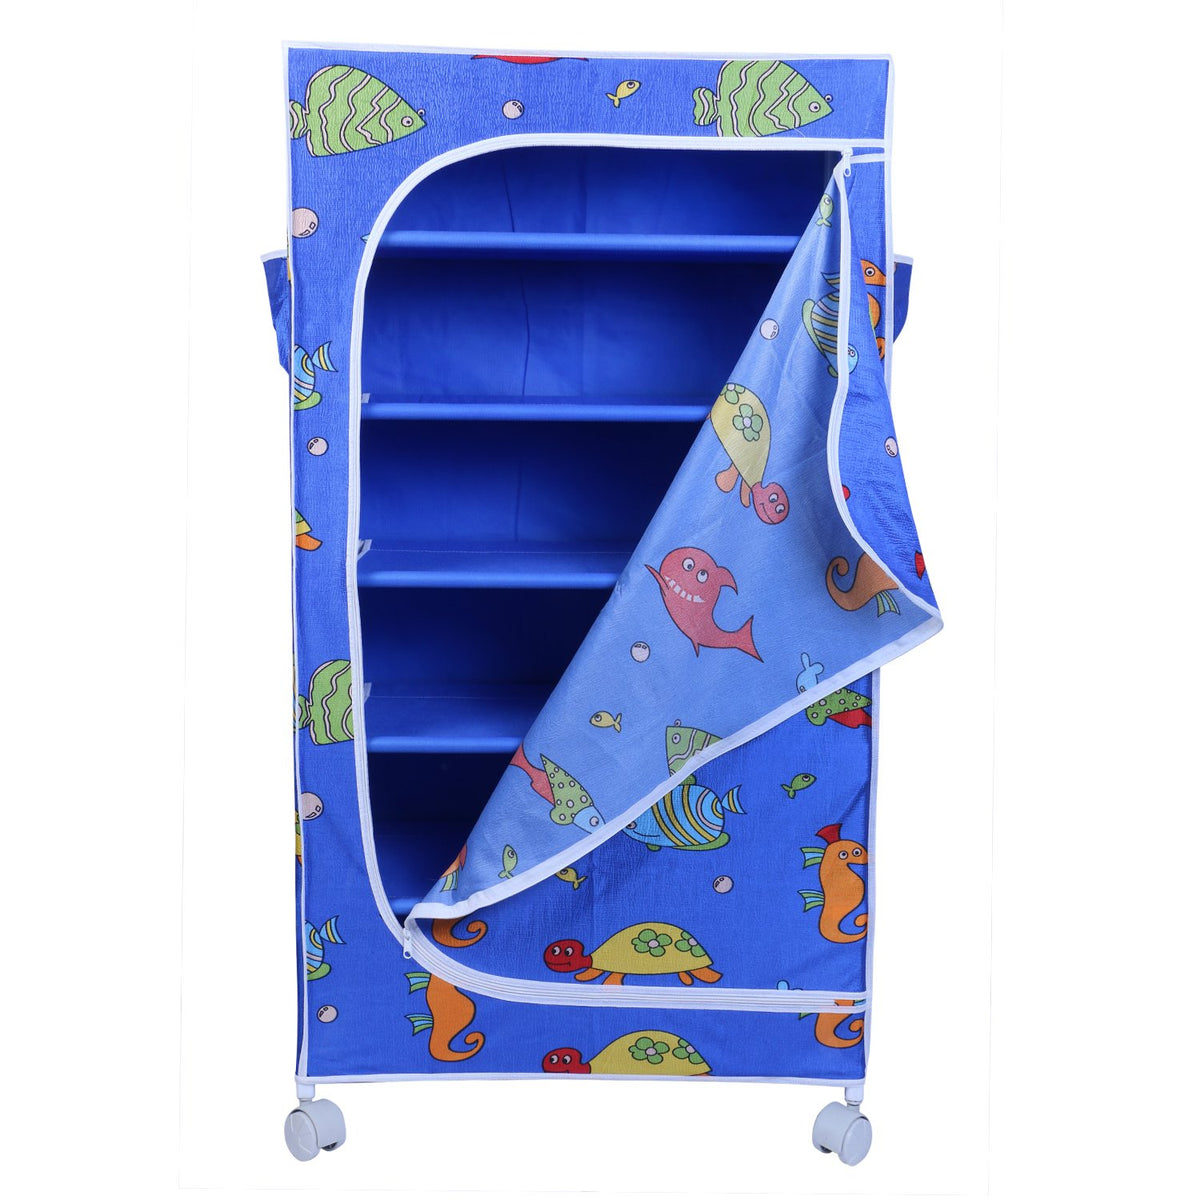 Carbon Steel Collapsible Wardrobe, Finish Color - Printed Blue